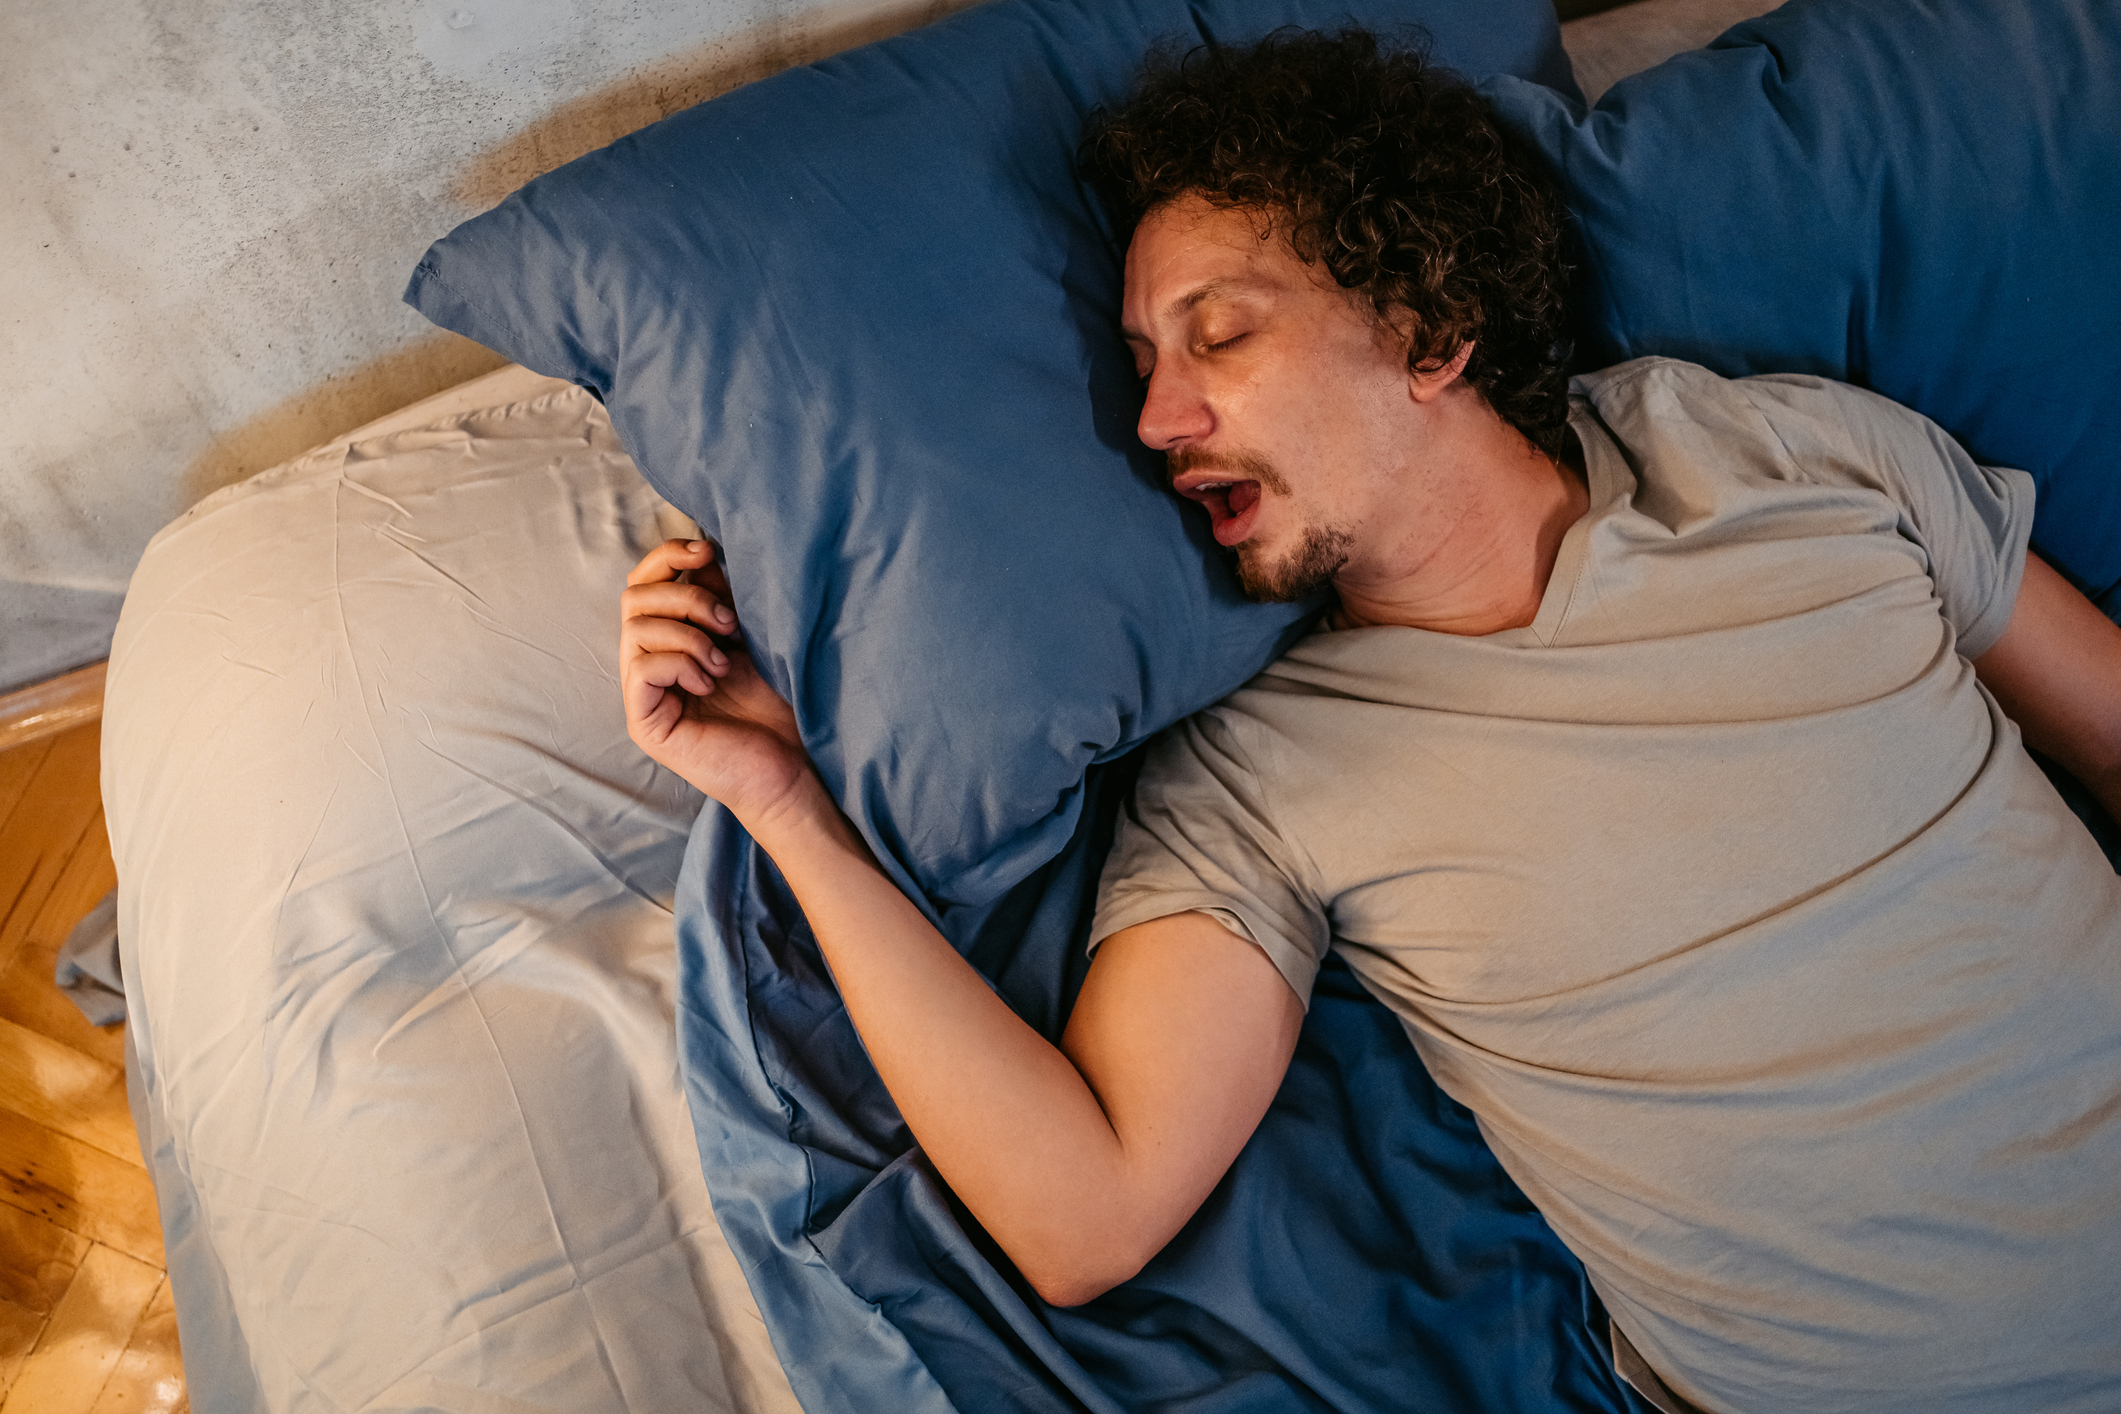 Man sleeping peacefully with one arm extended, lying on a bed with pillows